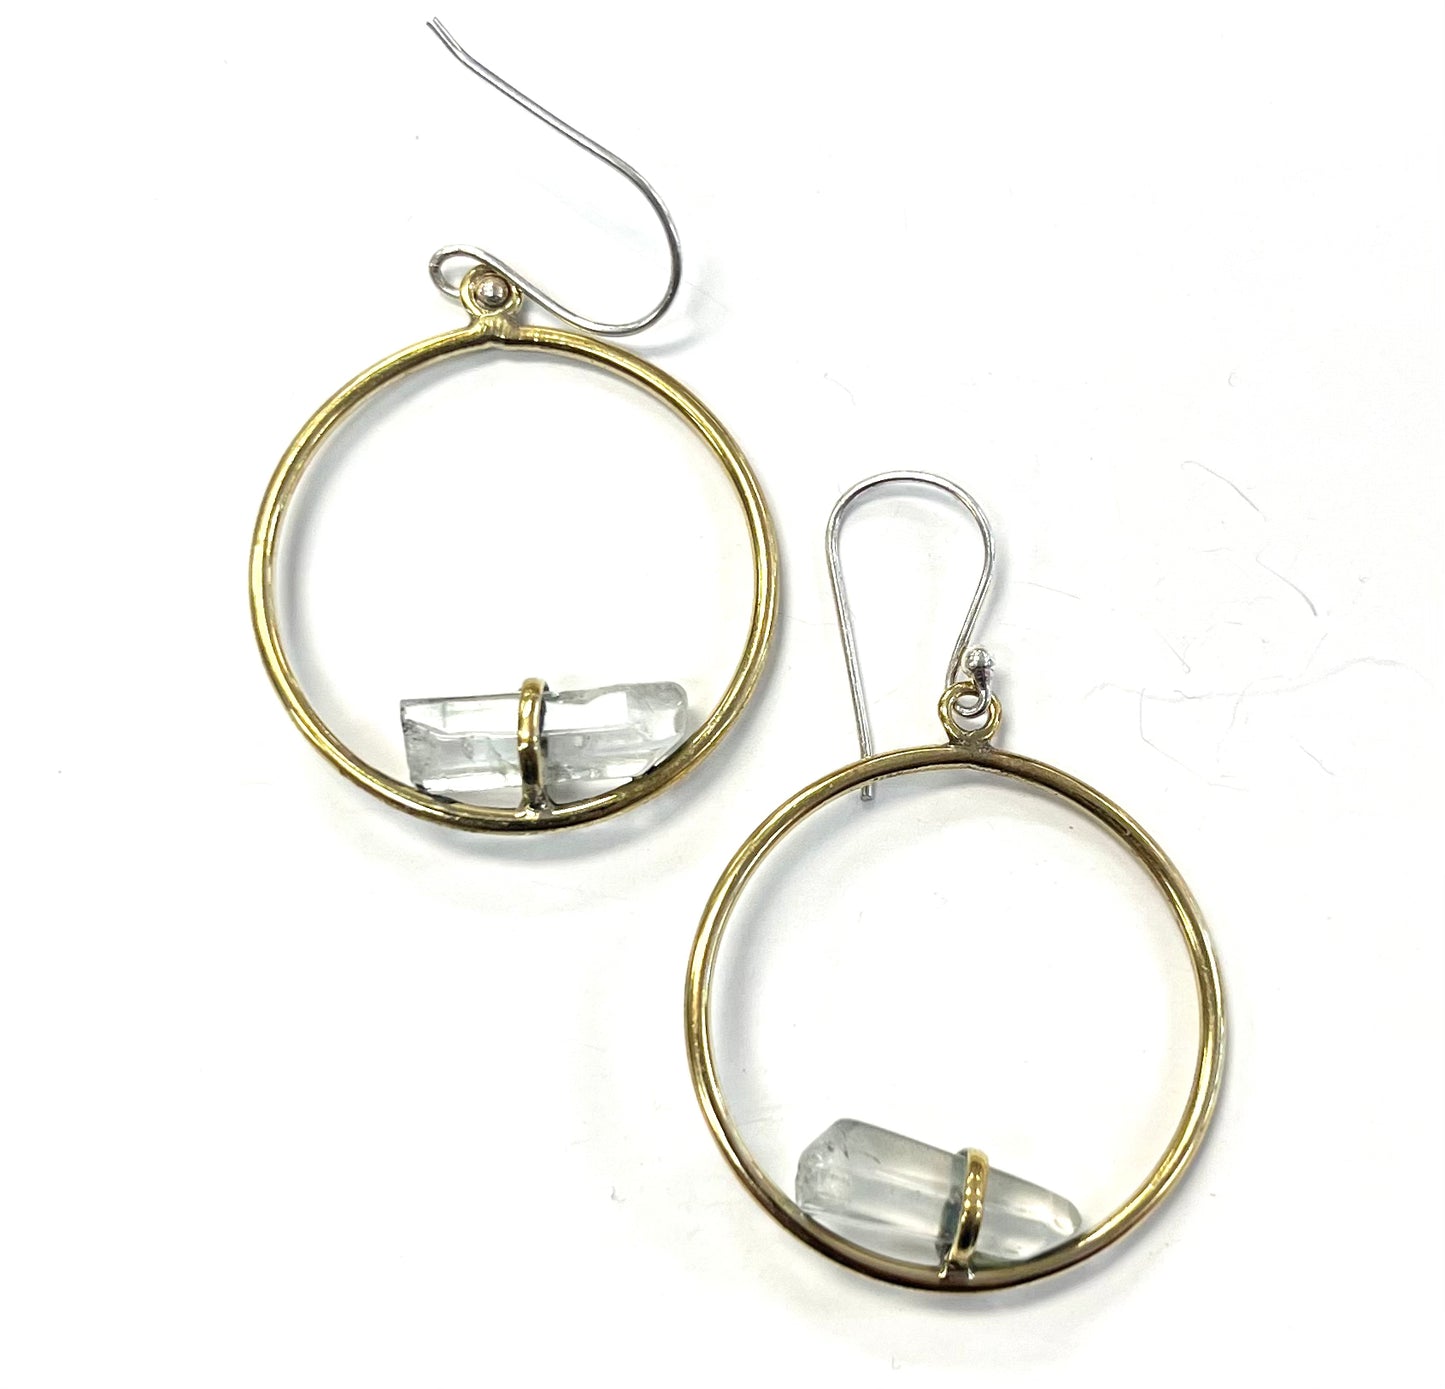 Dangle Gold Plated Hoop Earrings with Clear Quartz Point